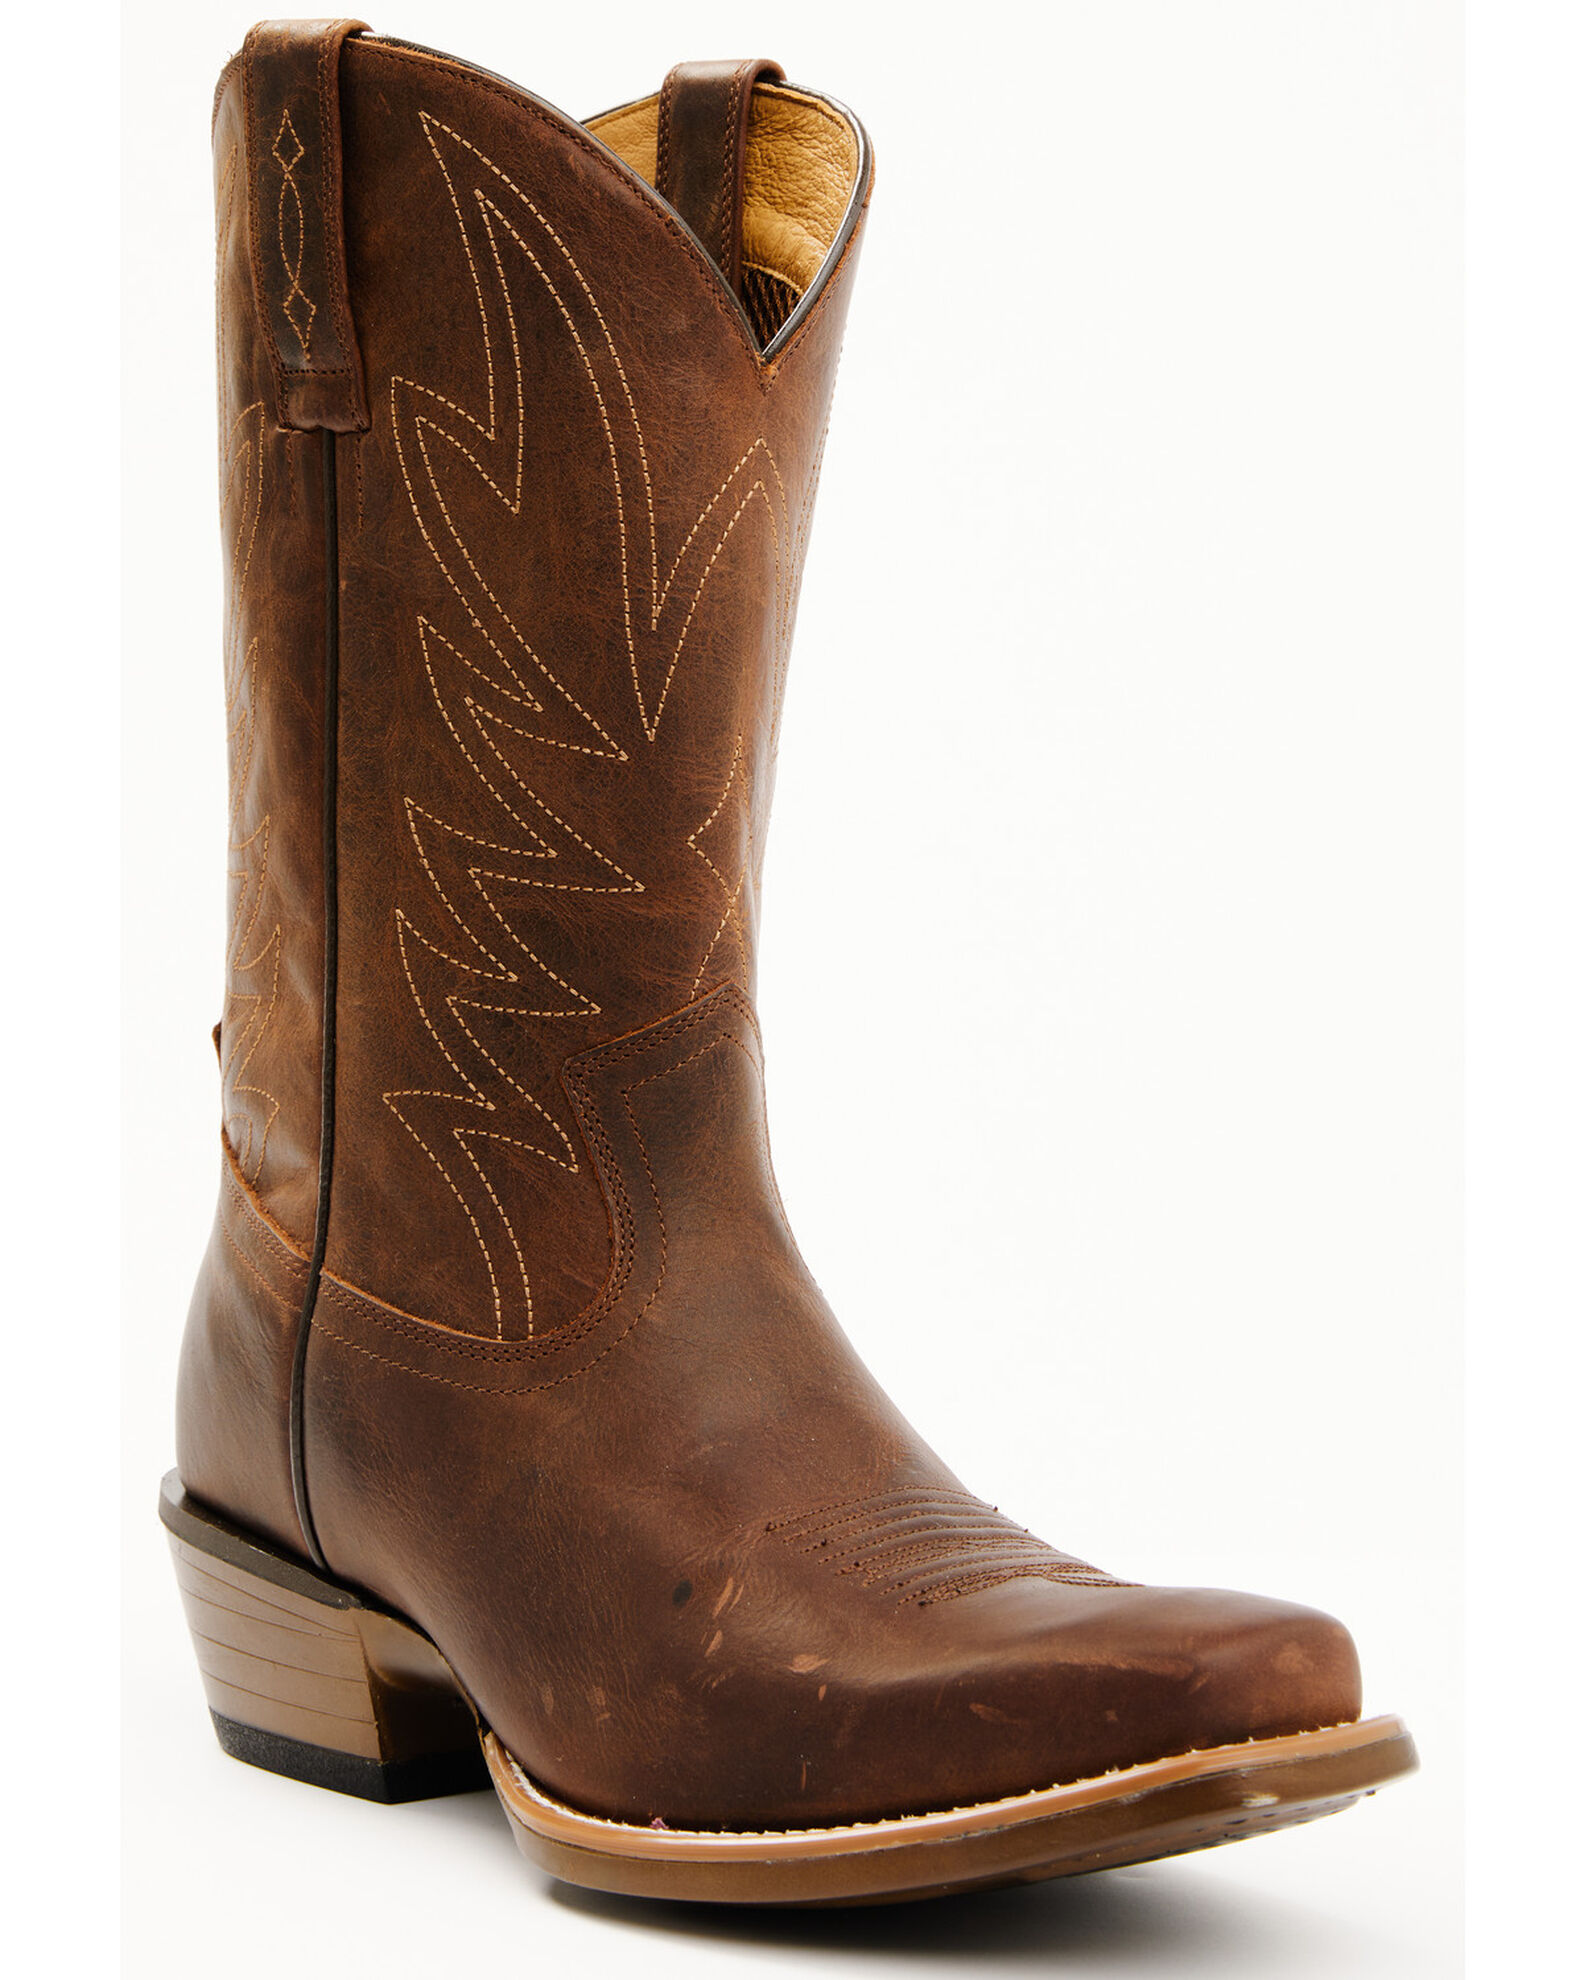 Product Name: Cody James Men's Hoverfly Western Performance Boots ...